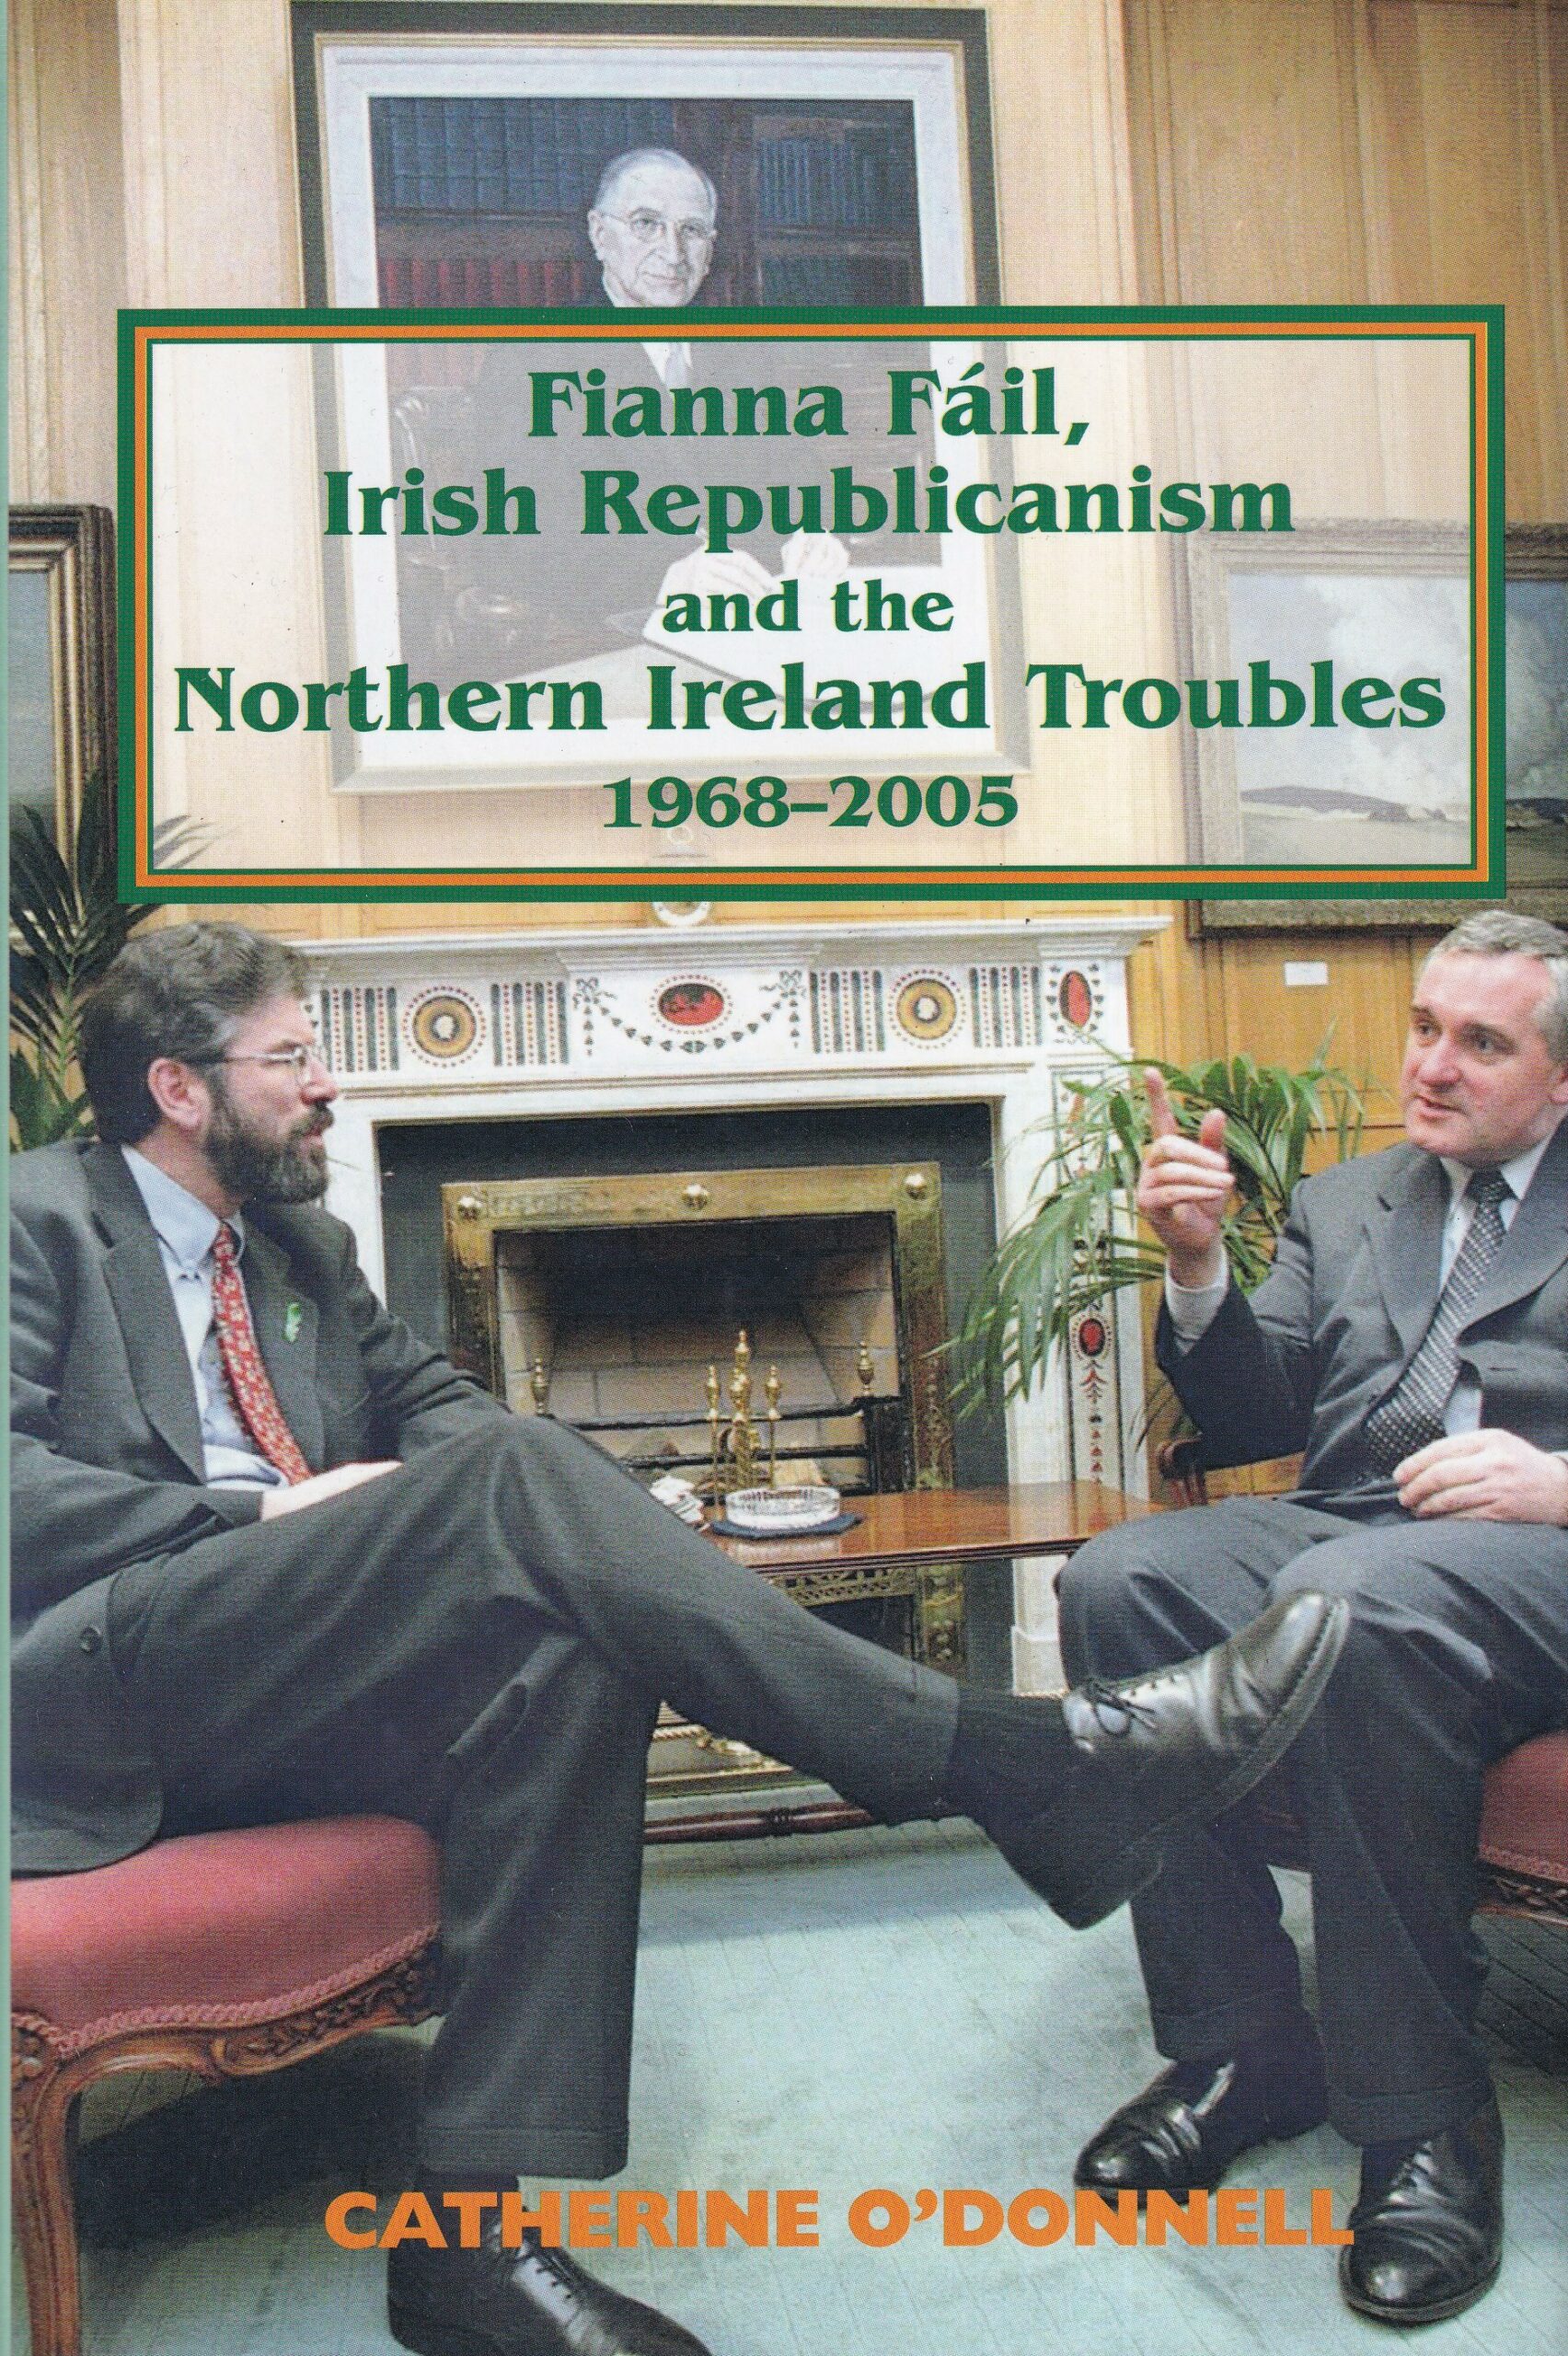 Fianna Fáil, Irish Republicanism and the Northern Ireland Troubles 1968-2005 | Catherine O'Donnell | Charlie Byrne's